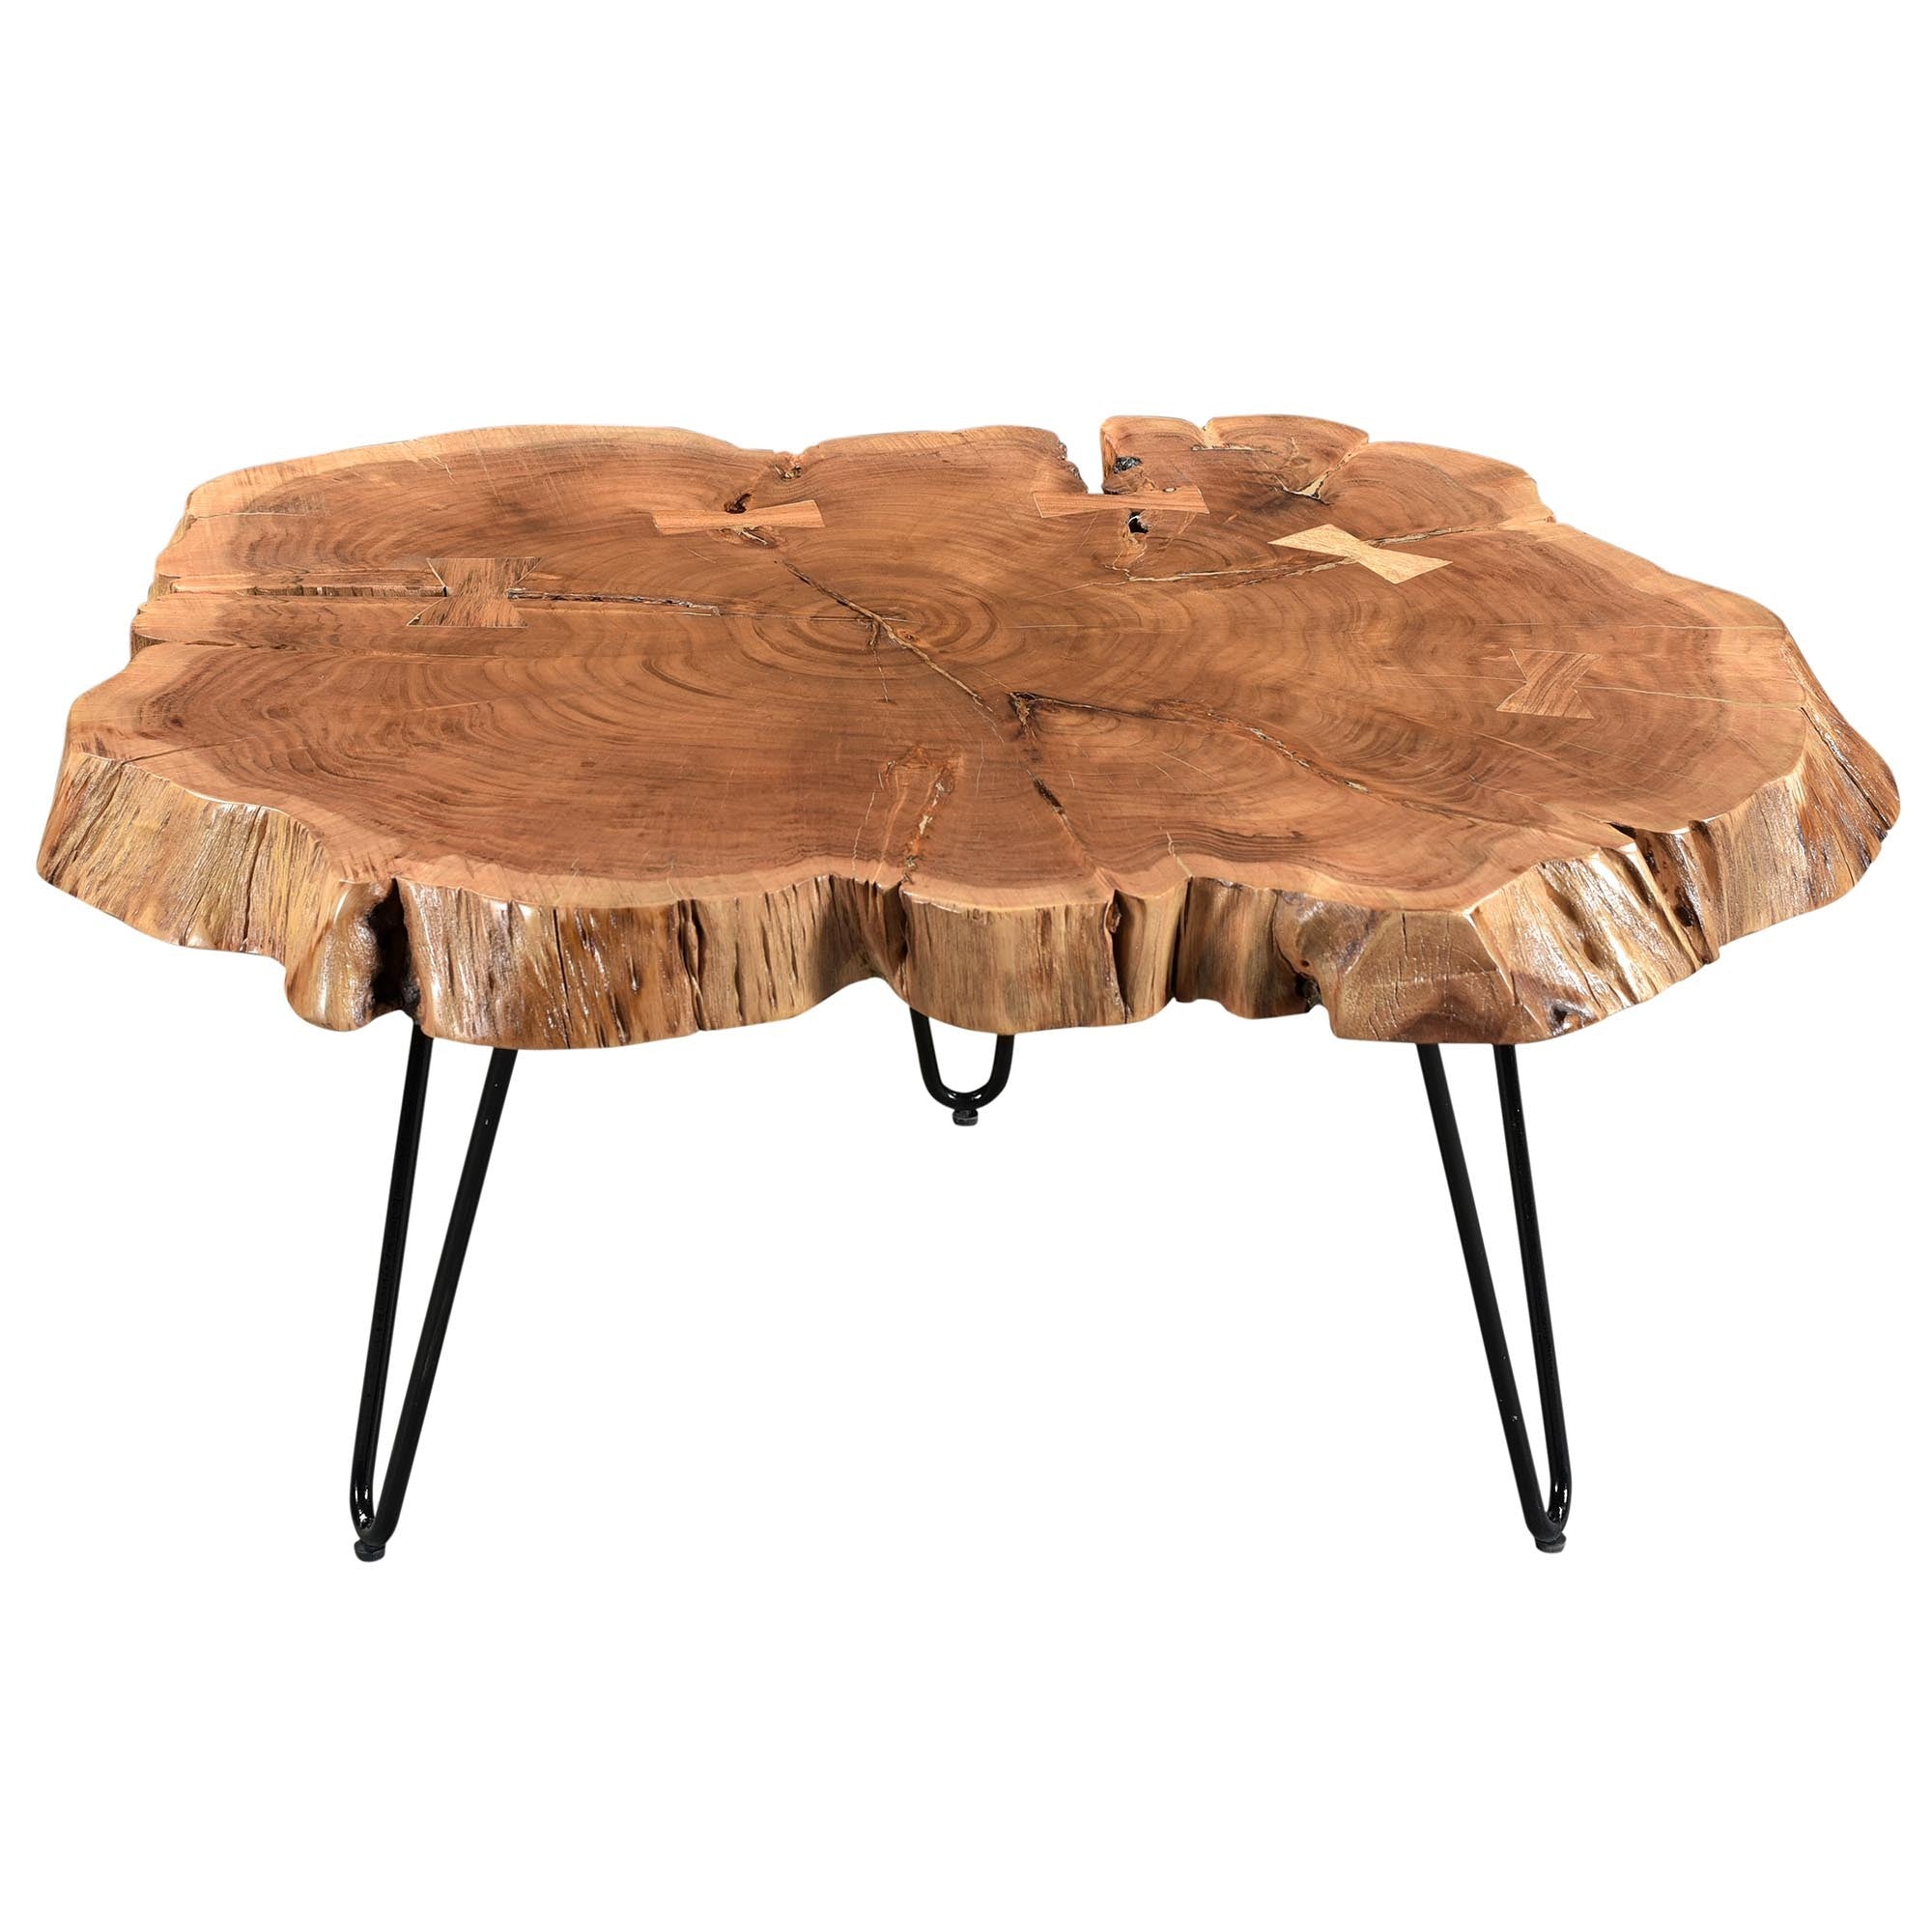 NILA-COFFEE TABLE-NATURAL - ACCENT FURNITURE